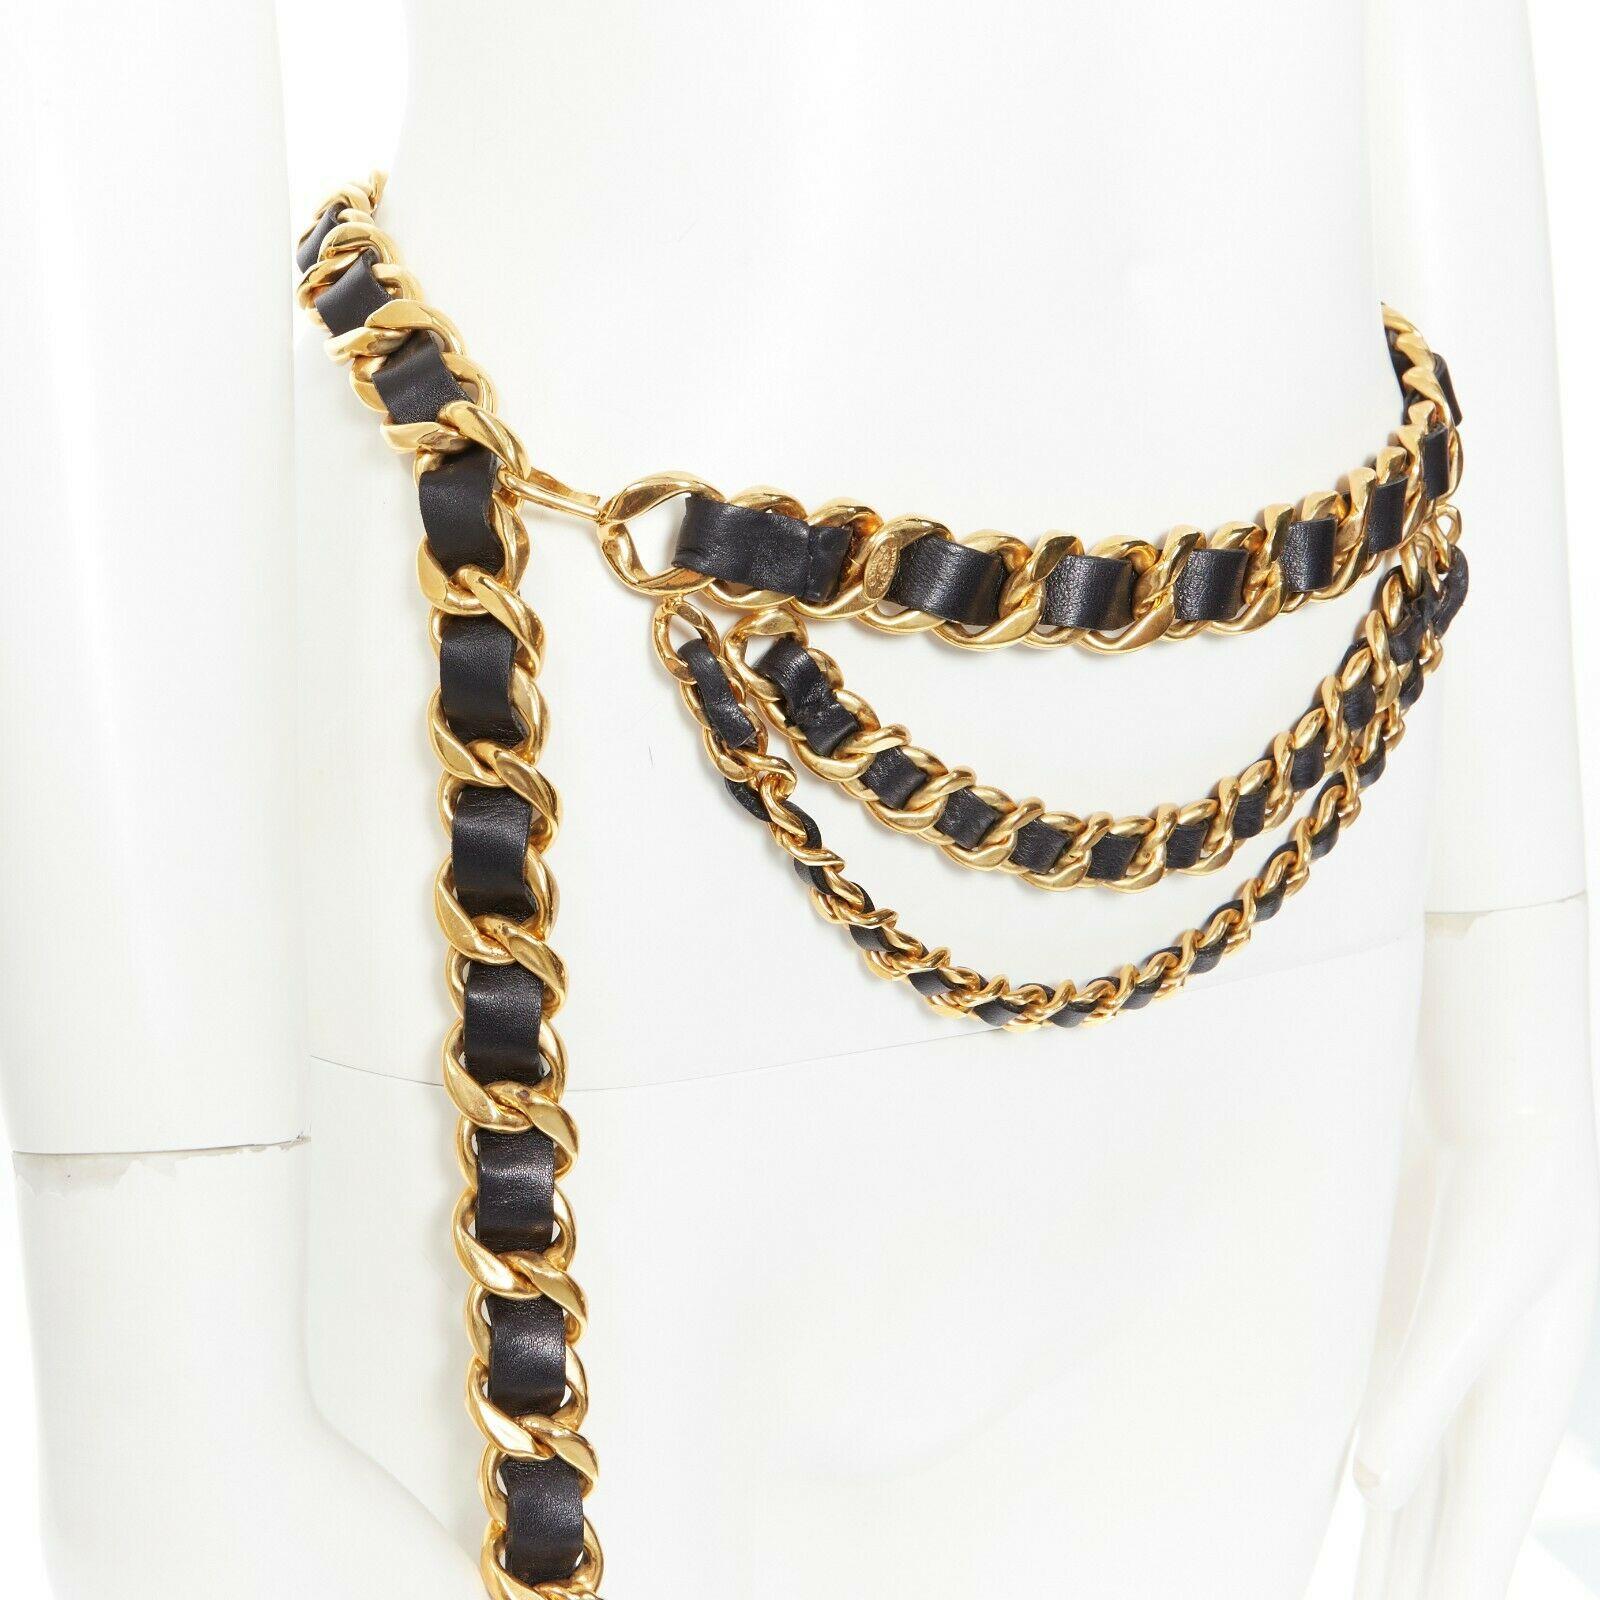 CHANEL KARL LAGERFELD 2.55 chunky gold-tone chain leather trimmed triple belt
Brand: CHANEL
Designer: Karl Lagerfeld
Model Name / Style: Chain belt
Material: Metal and leather
Color: Gold
Pattern: Solid
Closure: Hook & Loop
Extra Detail: Gold-tone